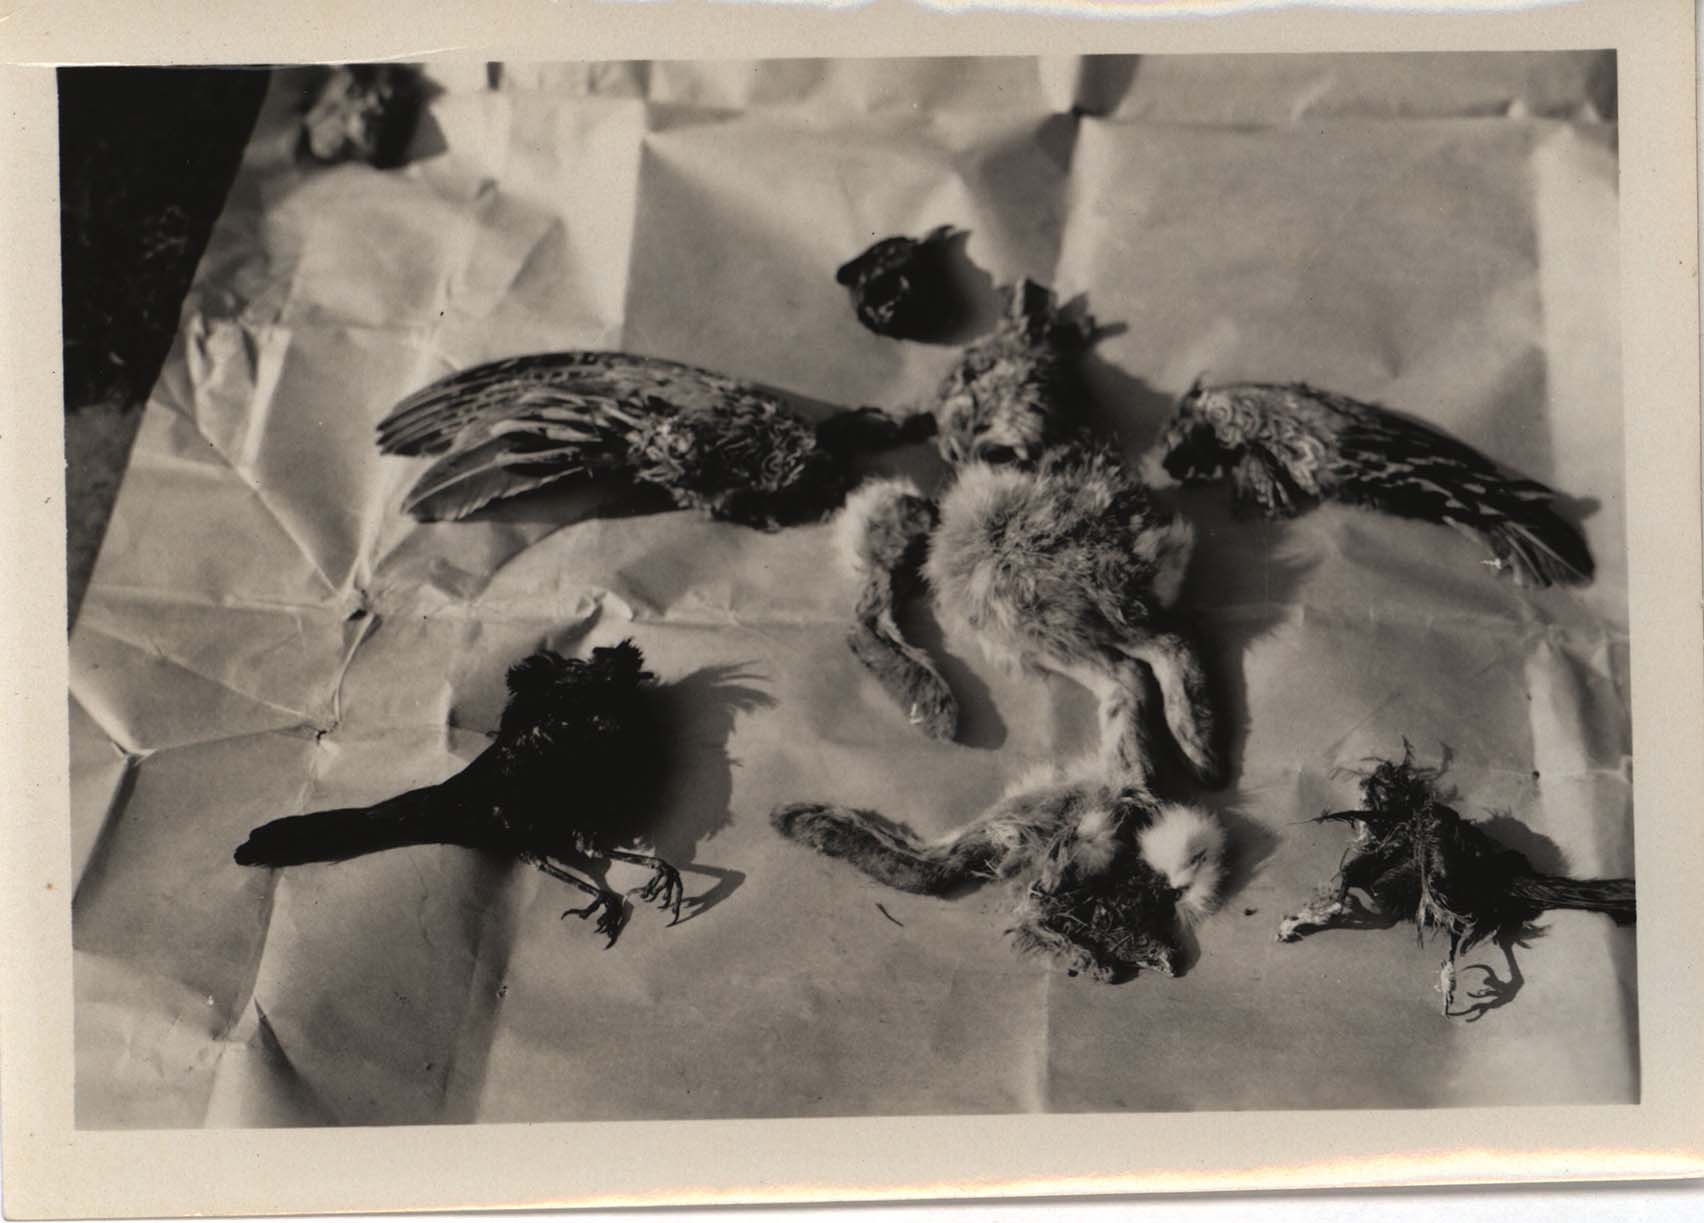 Photograph of the contents found in a Great Horned Owl nest